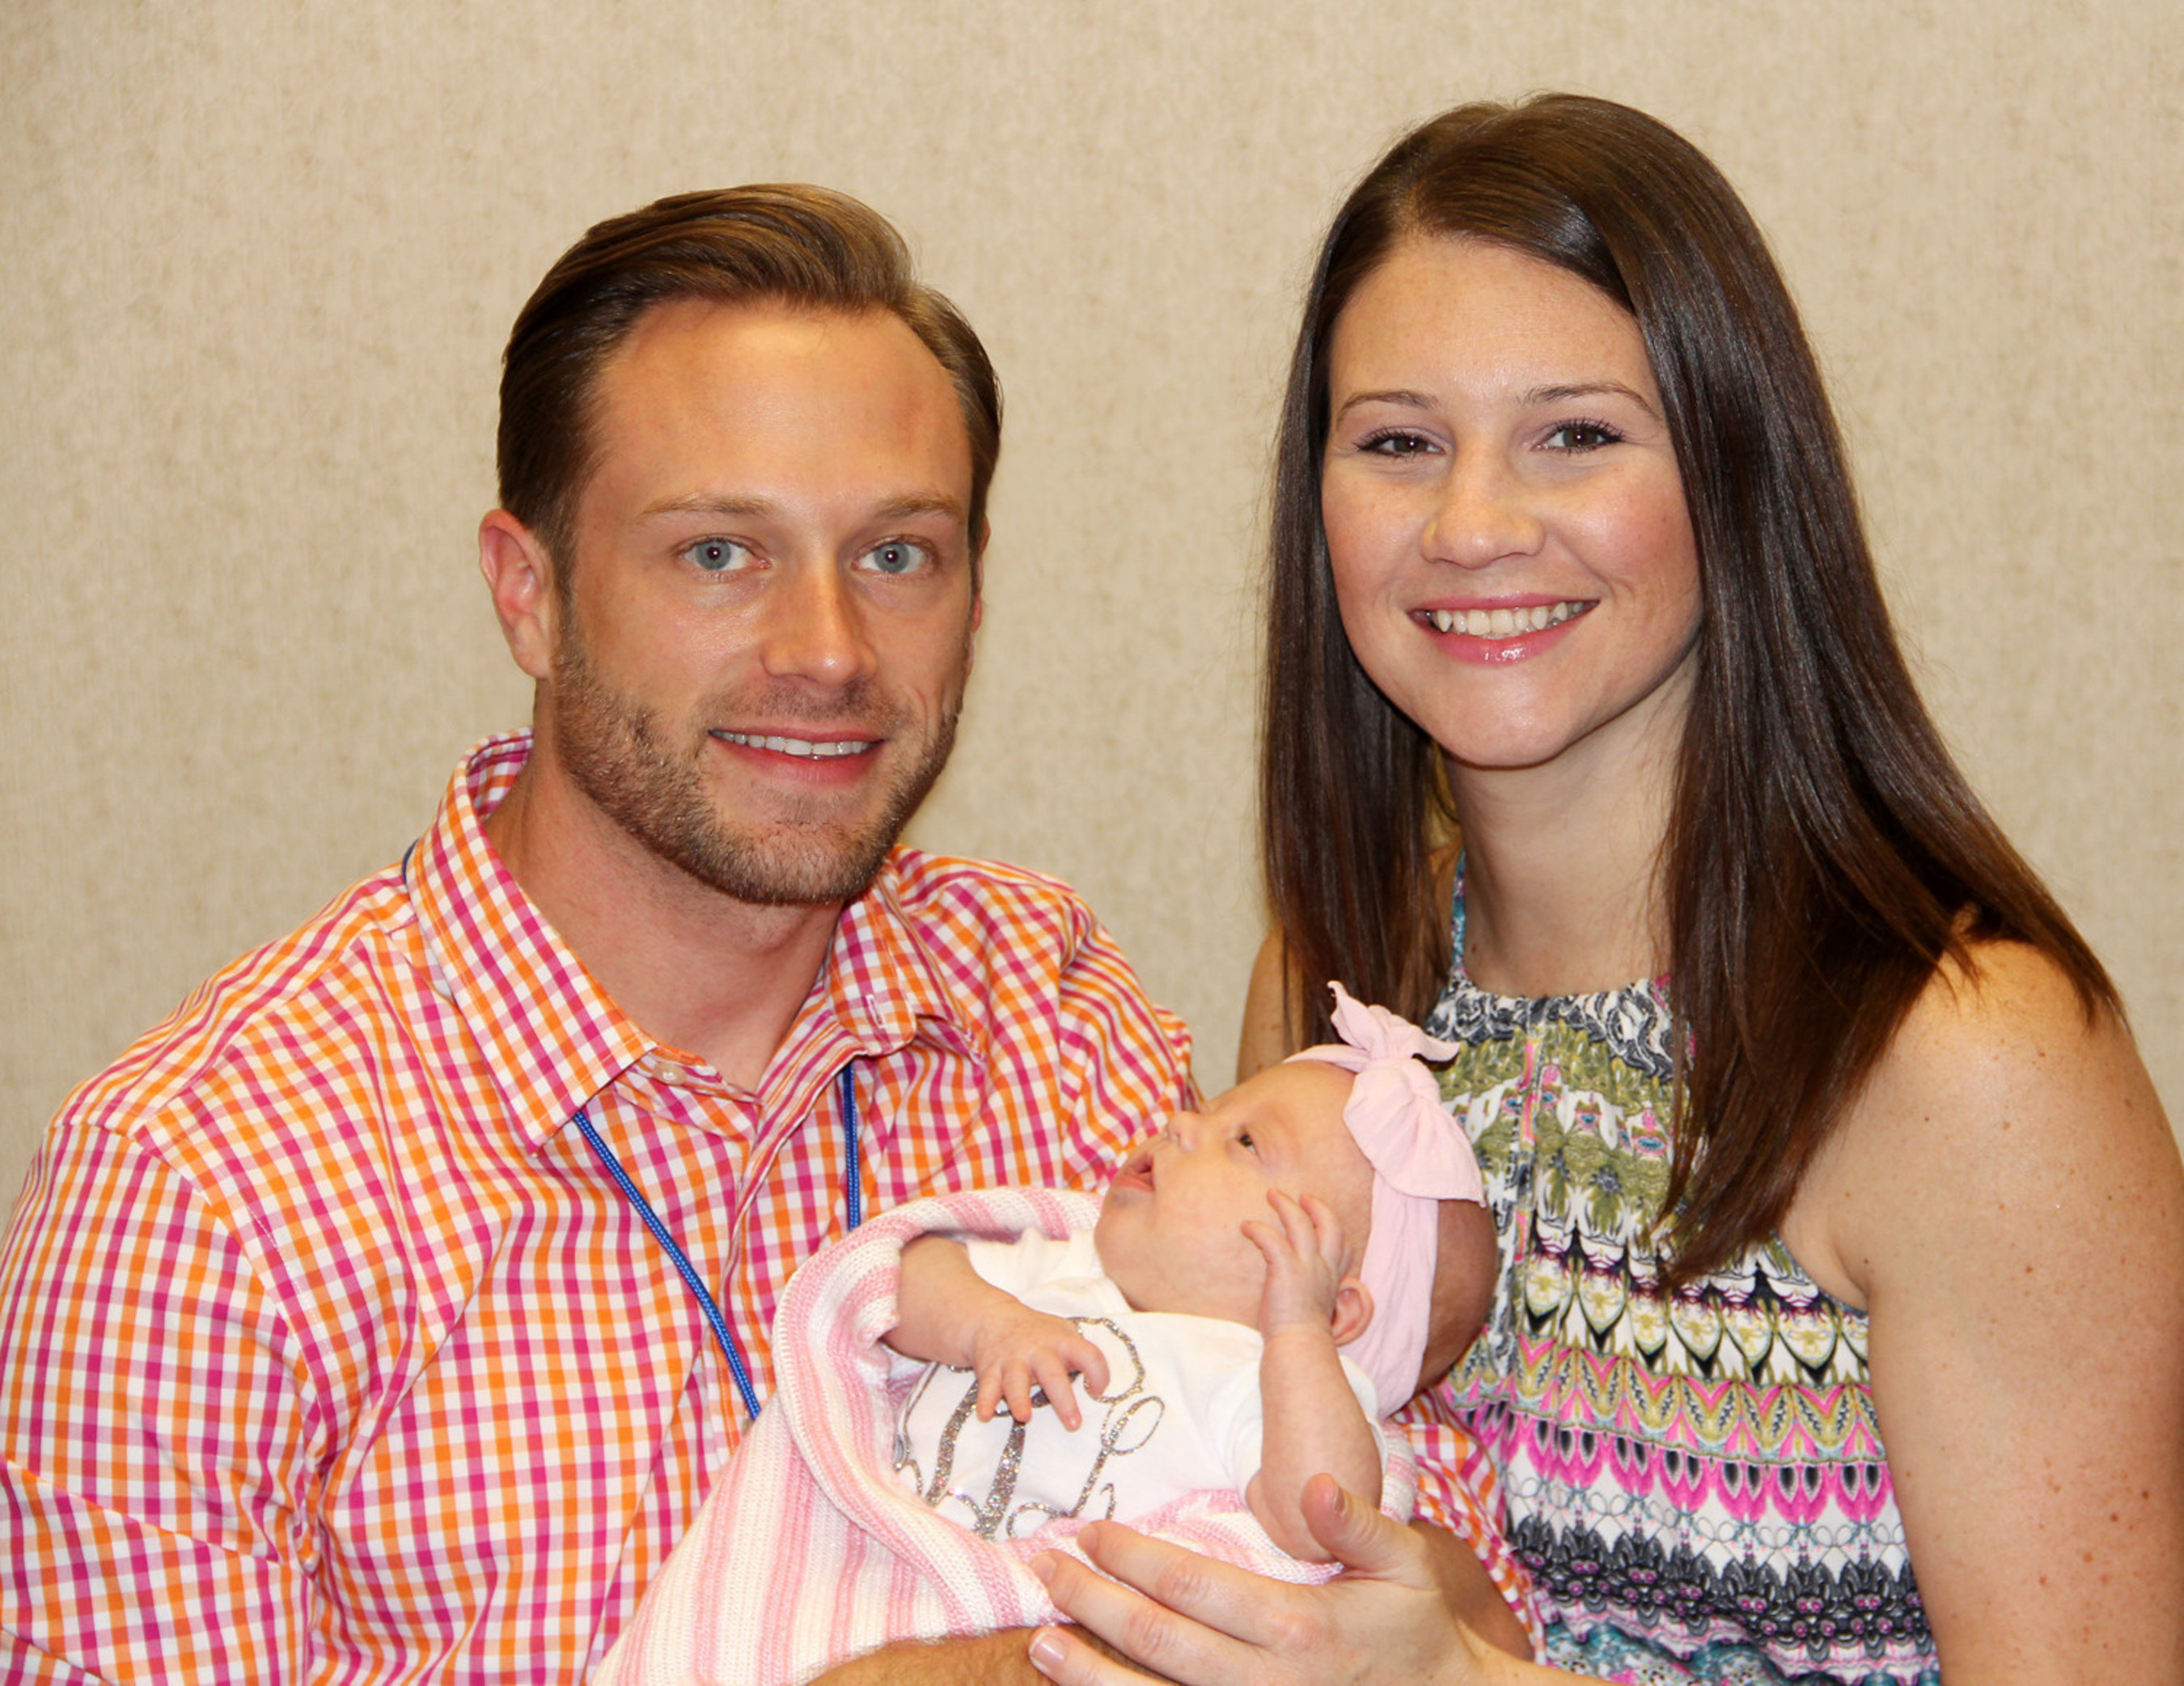 Parents Adam and Danielle Busby take Ava Lane home today.